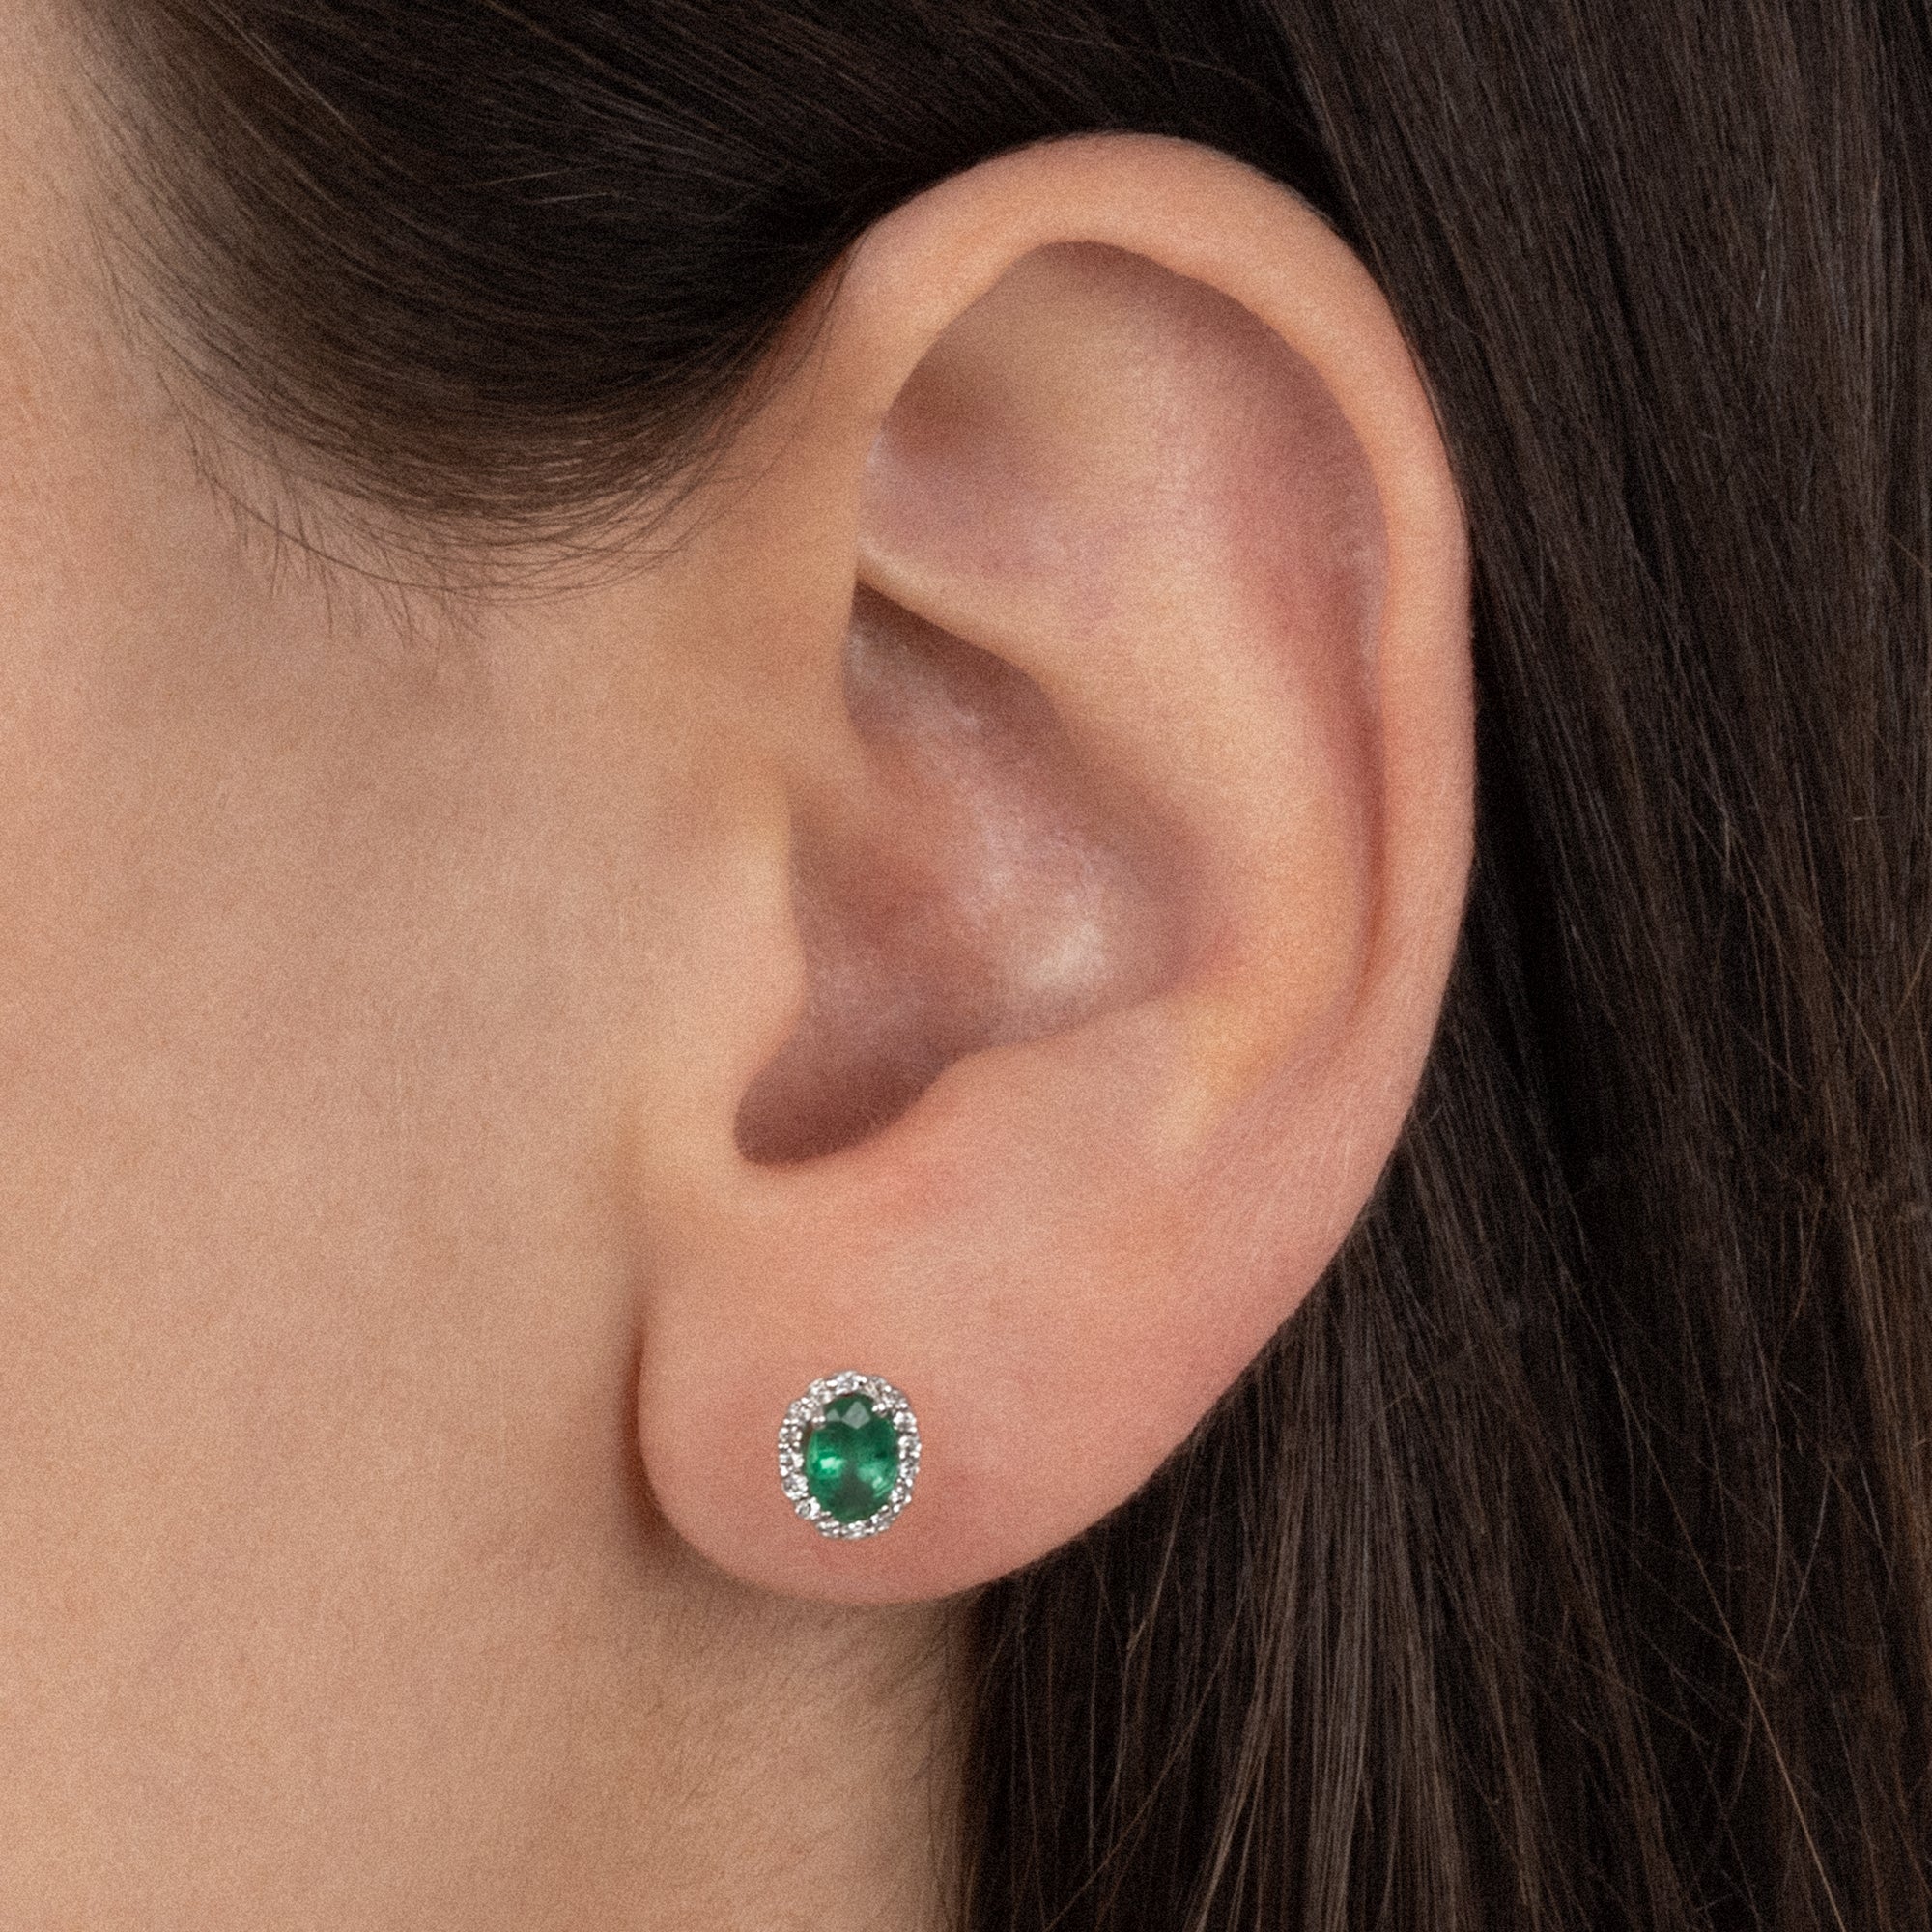 Earrings With Diamonds And Emerald